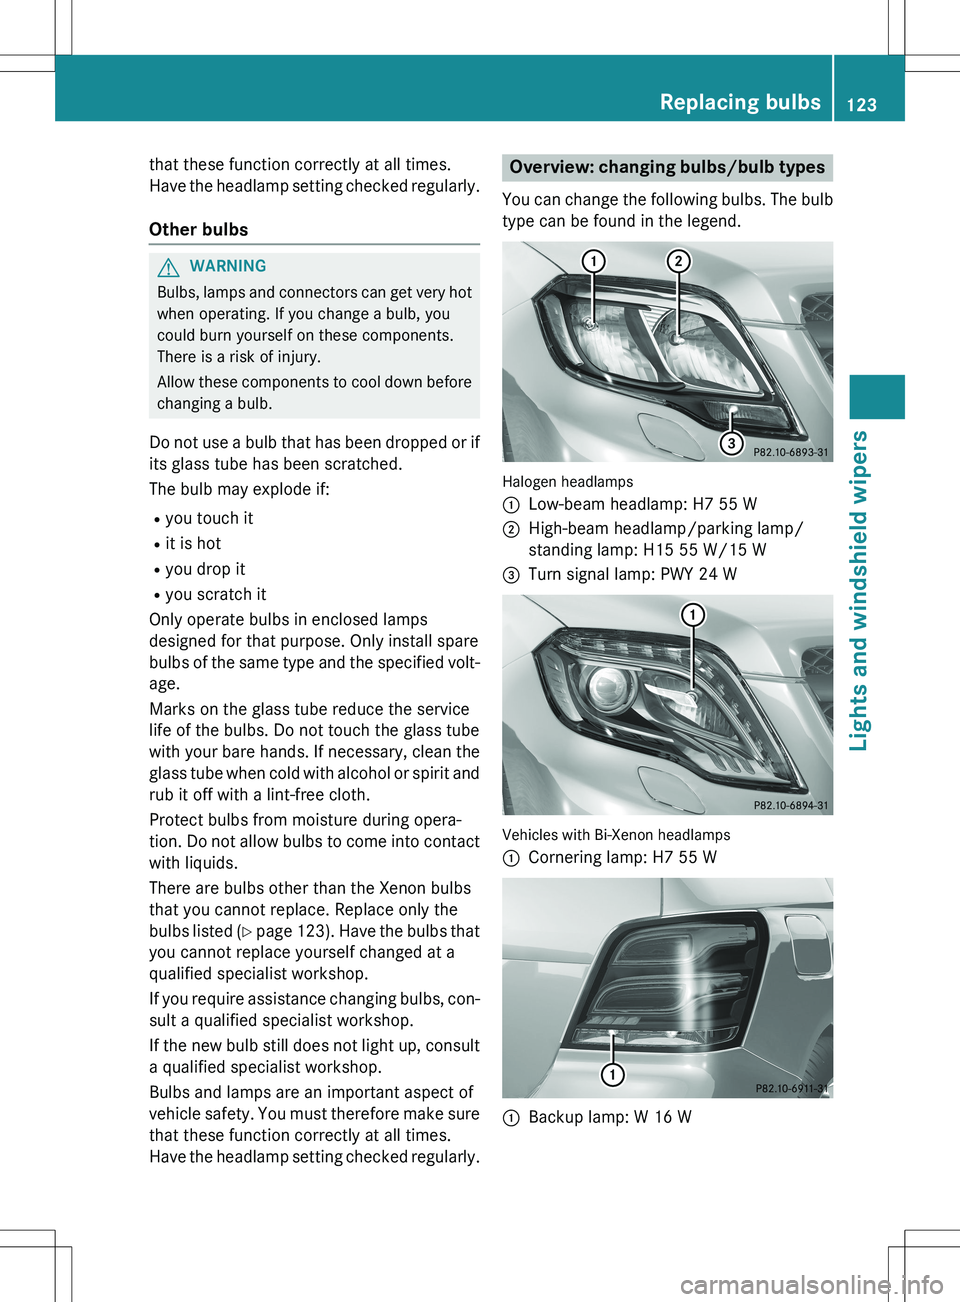 MERCEDES-BENZ GLK-CLASS SUV 2015  Owners Manual that these function correctly at all times. 
Have the headlamp setting checked regularly.
Other bulbs
GWARNING
Bulbs, lamps and connectors can get very hotwhen operating. If you change a bulb, you 
co